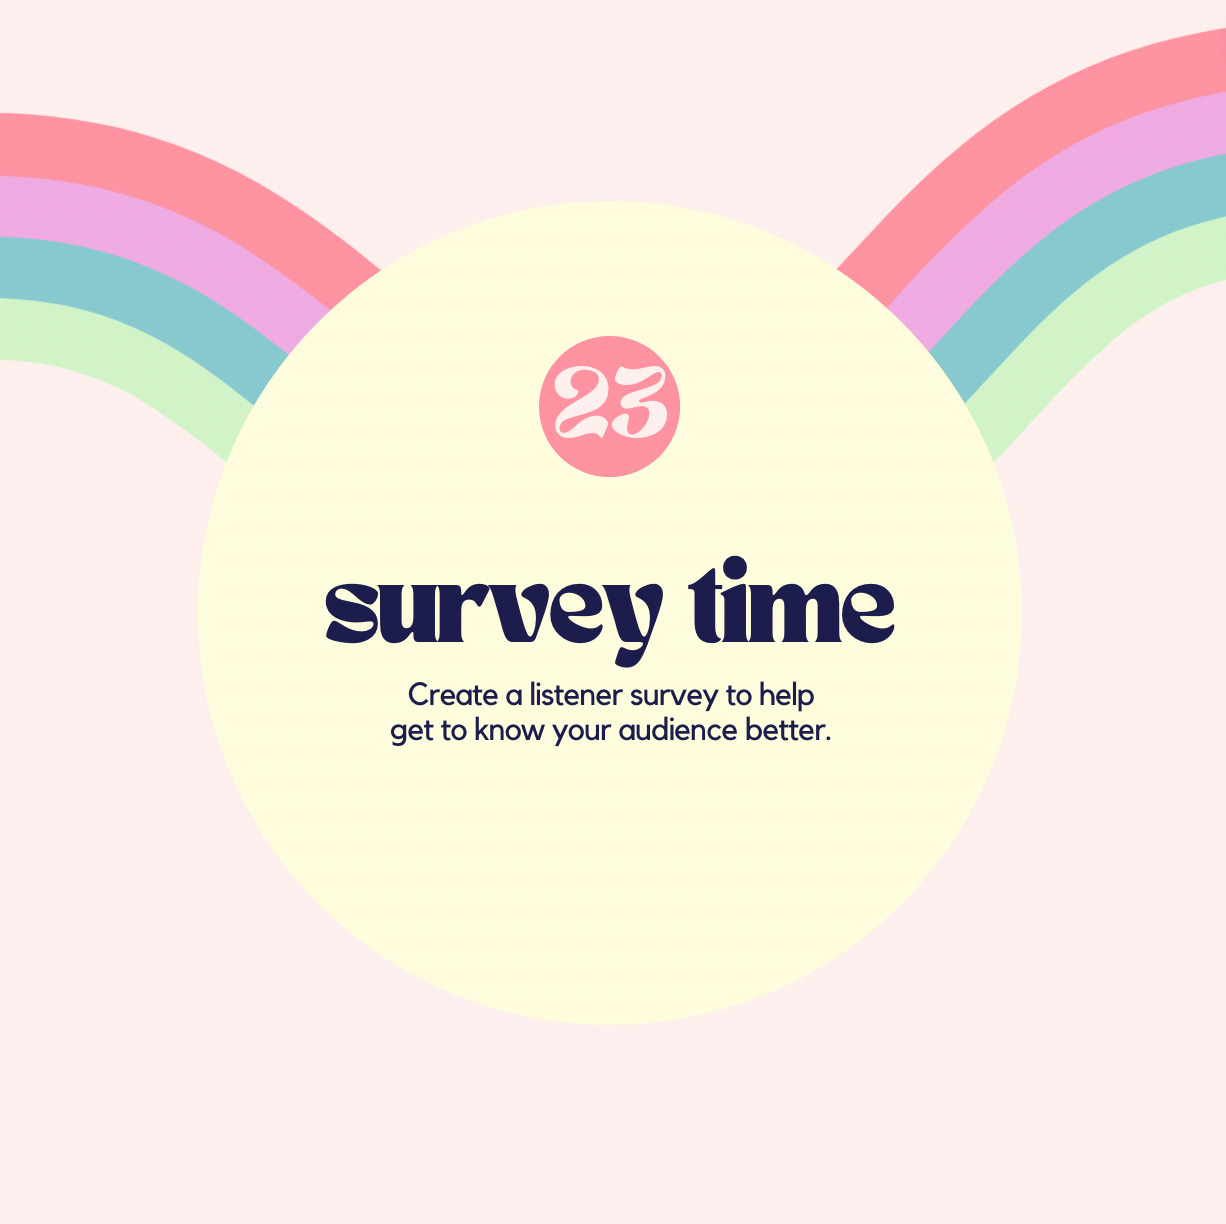 #23 Survey time. Create a listener survey to help get to know your audience better.